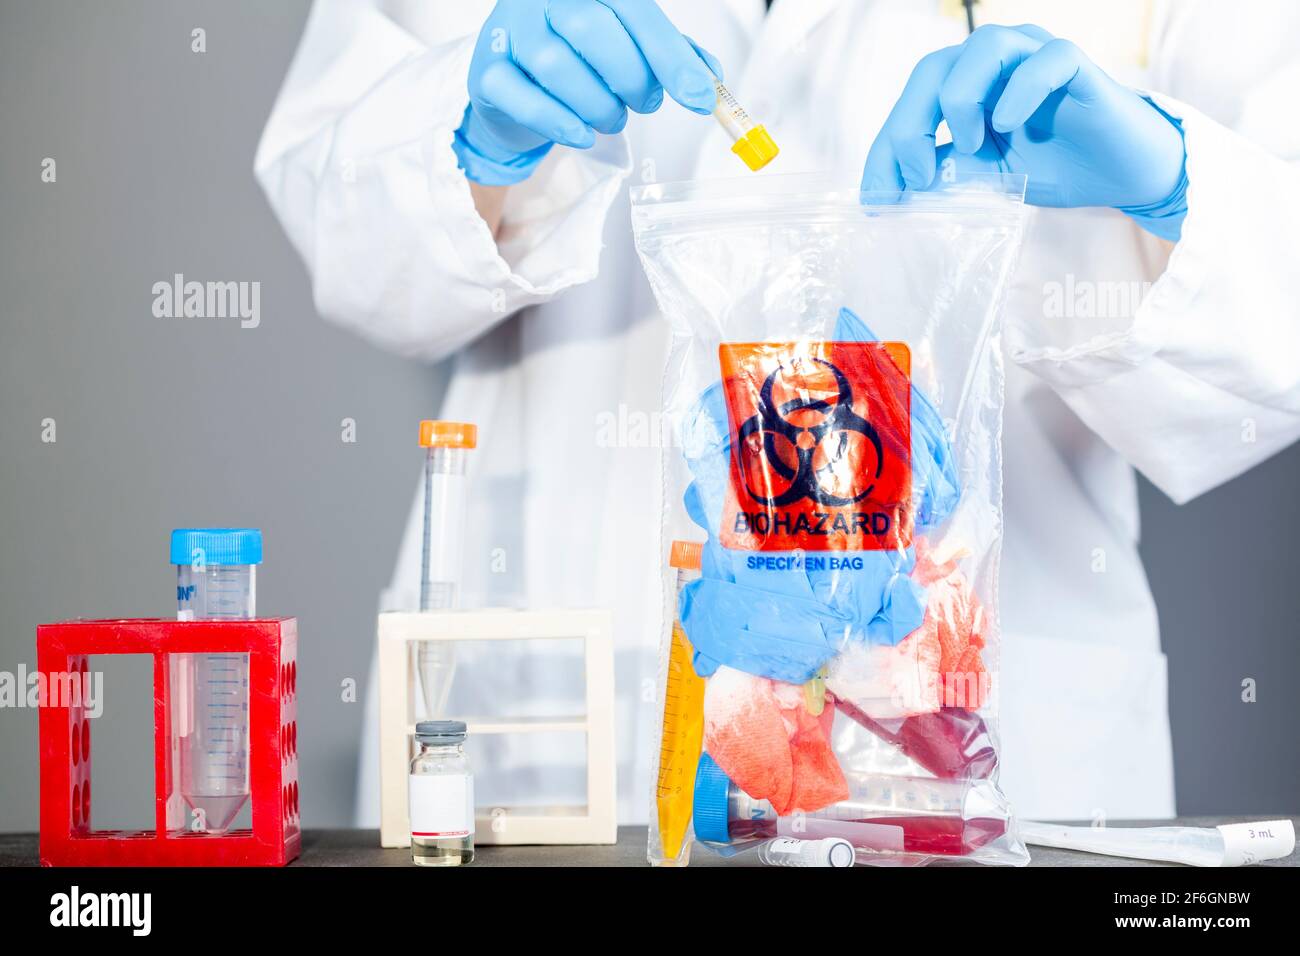 A woman researcher is holding a clear plastic bag with biohazard logo printed on. The bag contains, potentially dangerous biological specimens. Scient Stock Photo